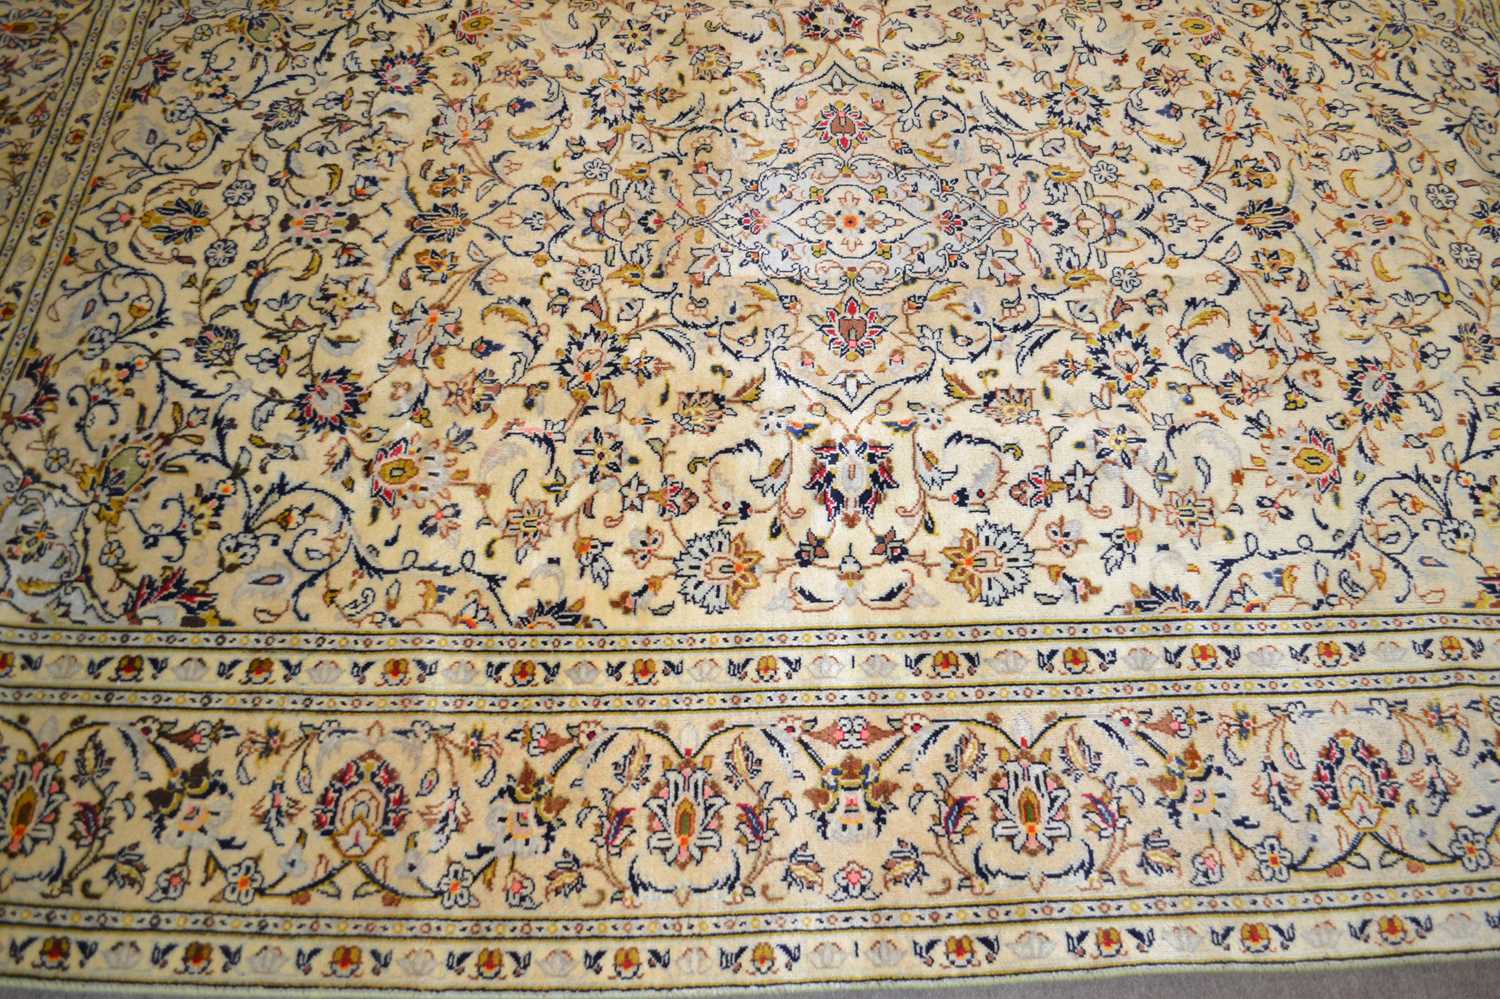 A modern Kashan carpet decorated with floral motifs on a pale background, 287 x 196cm - Image 2 of 2